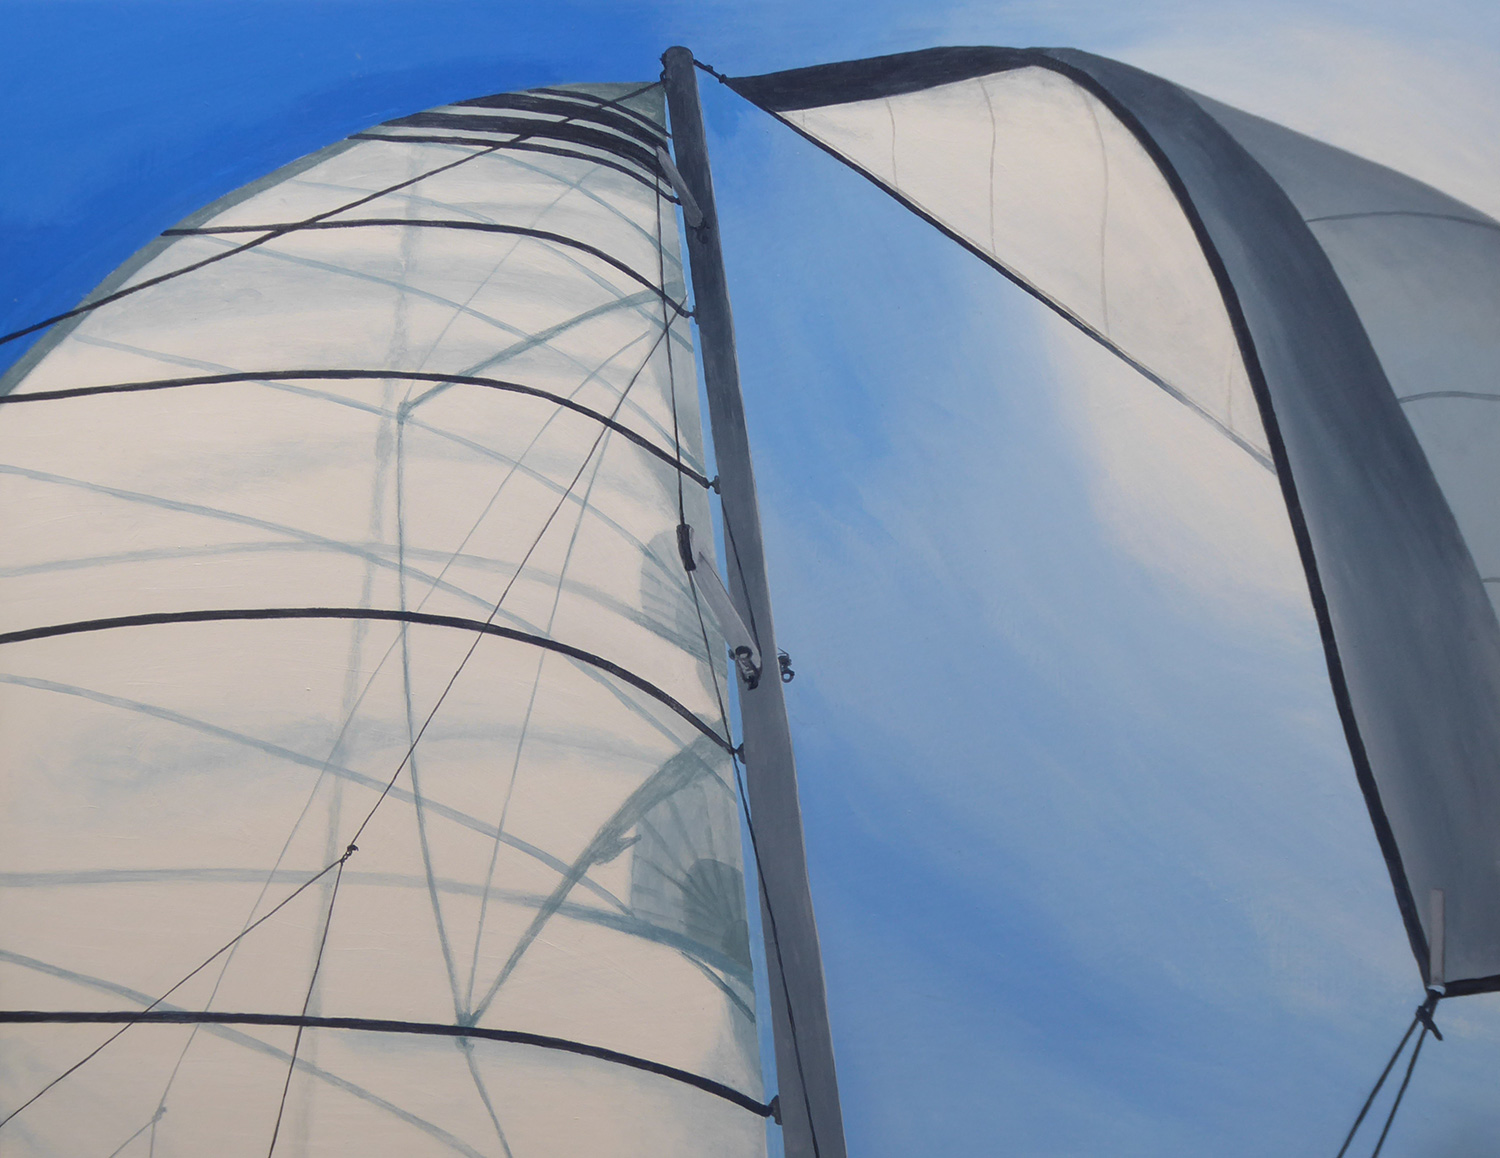 An acrylic painting of sails catching the breeze